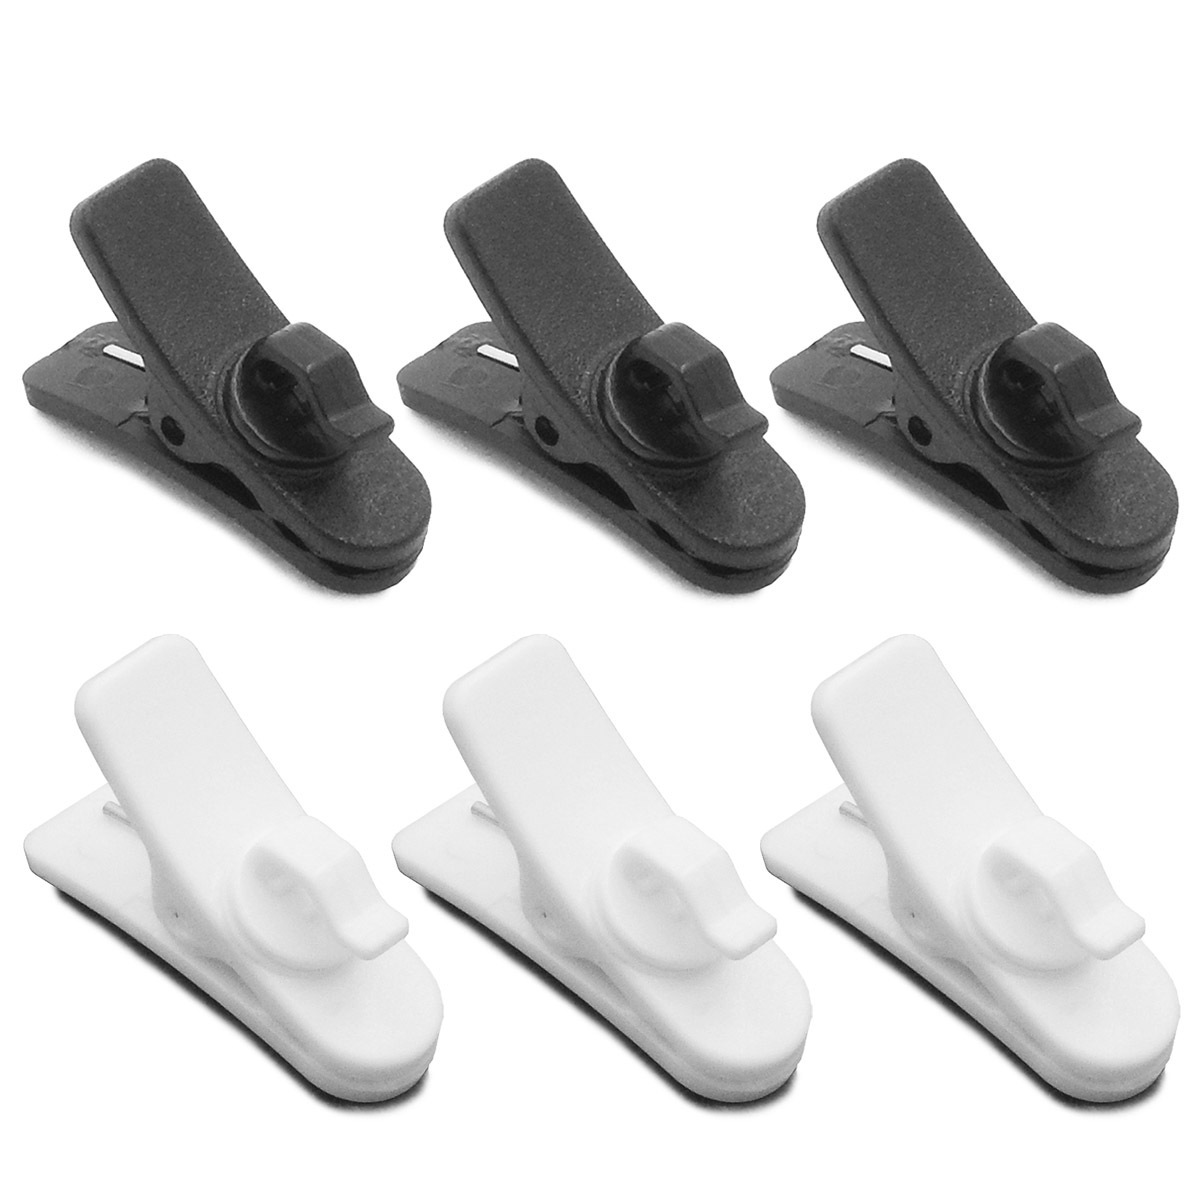  cable clip 6 piece SET earphone . headphone. code . fixation ... prevention 360 times rotation head light weight 